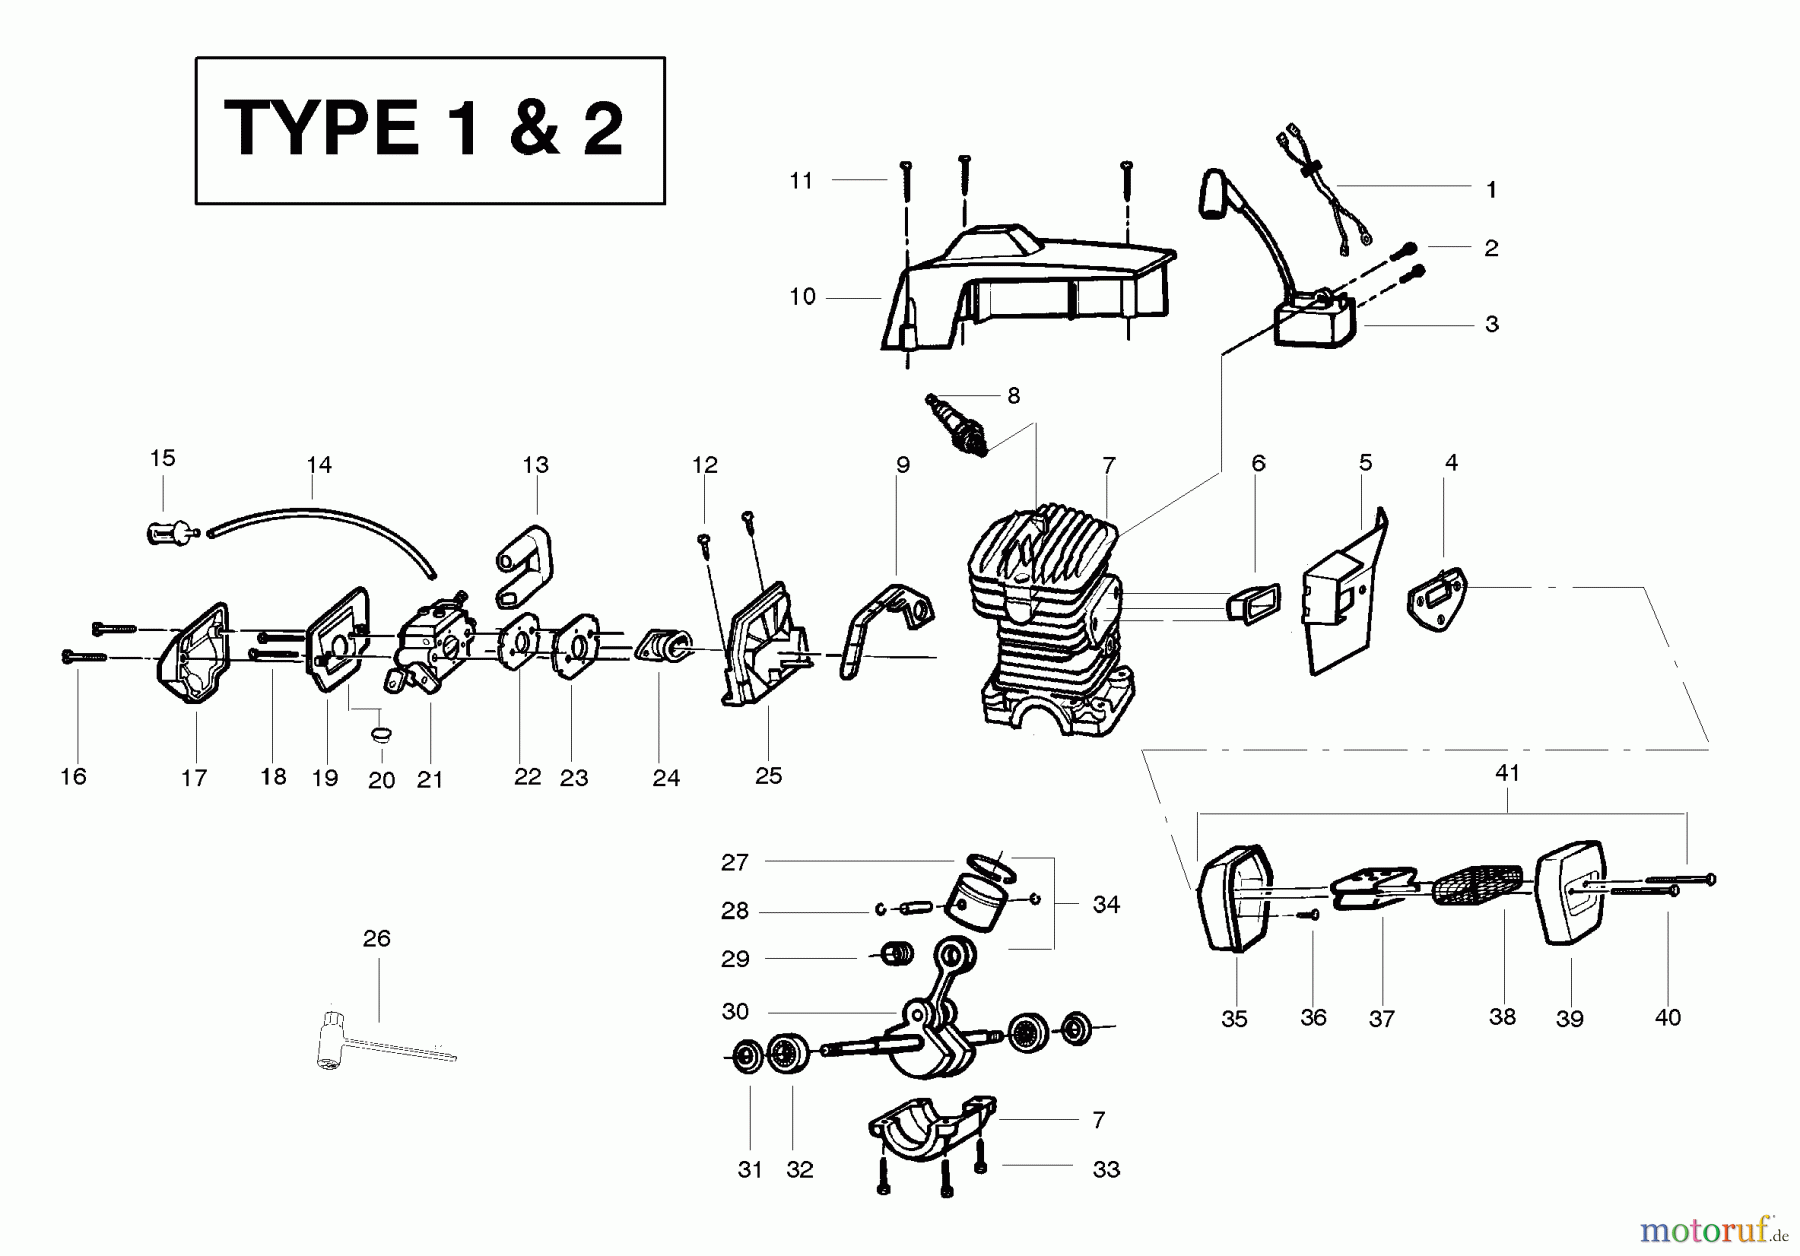  Poulan / Weed Eater Motorsägen PP295 (Type 1) - Poulan Pro Chainsaw Engine Assembly Type 1 & 2